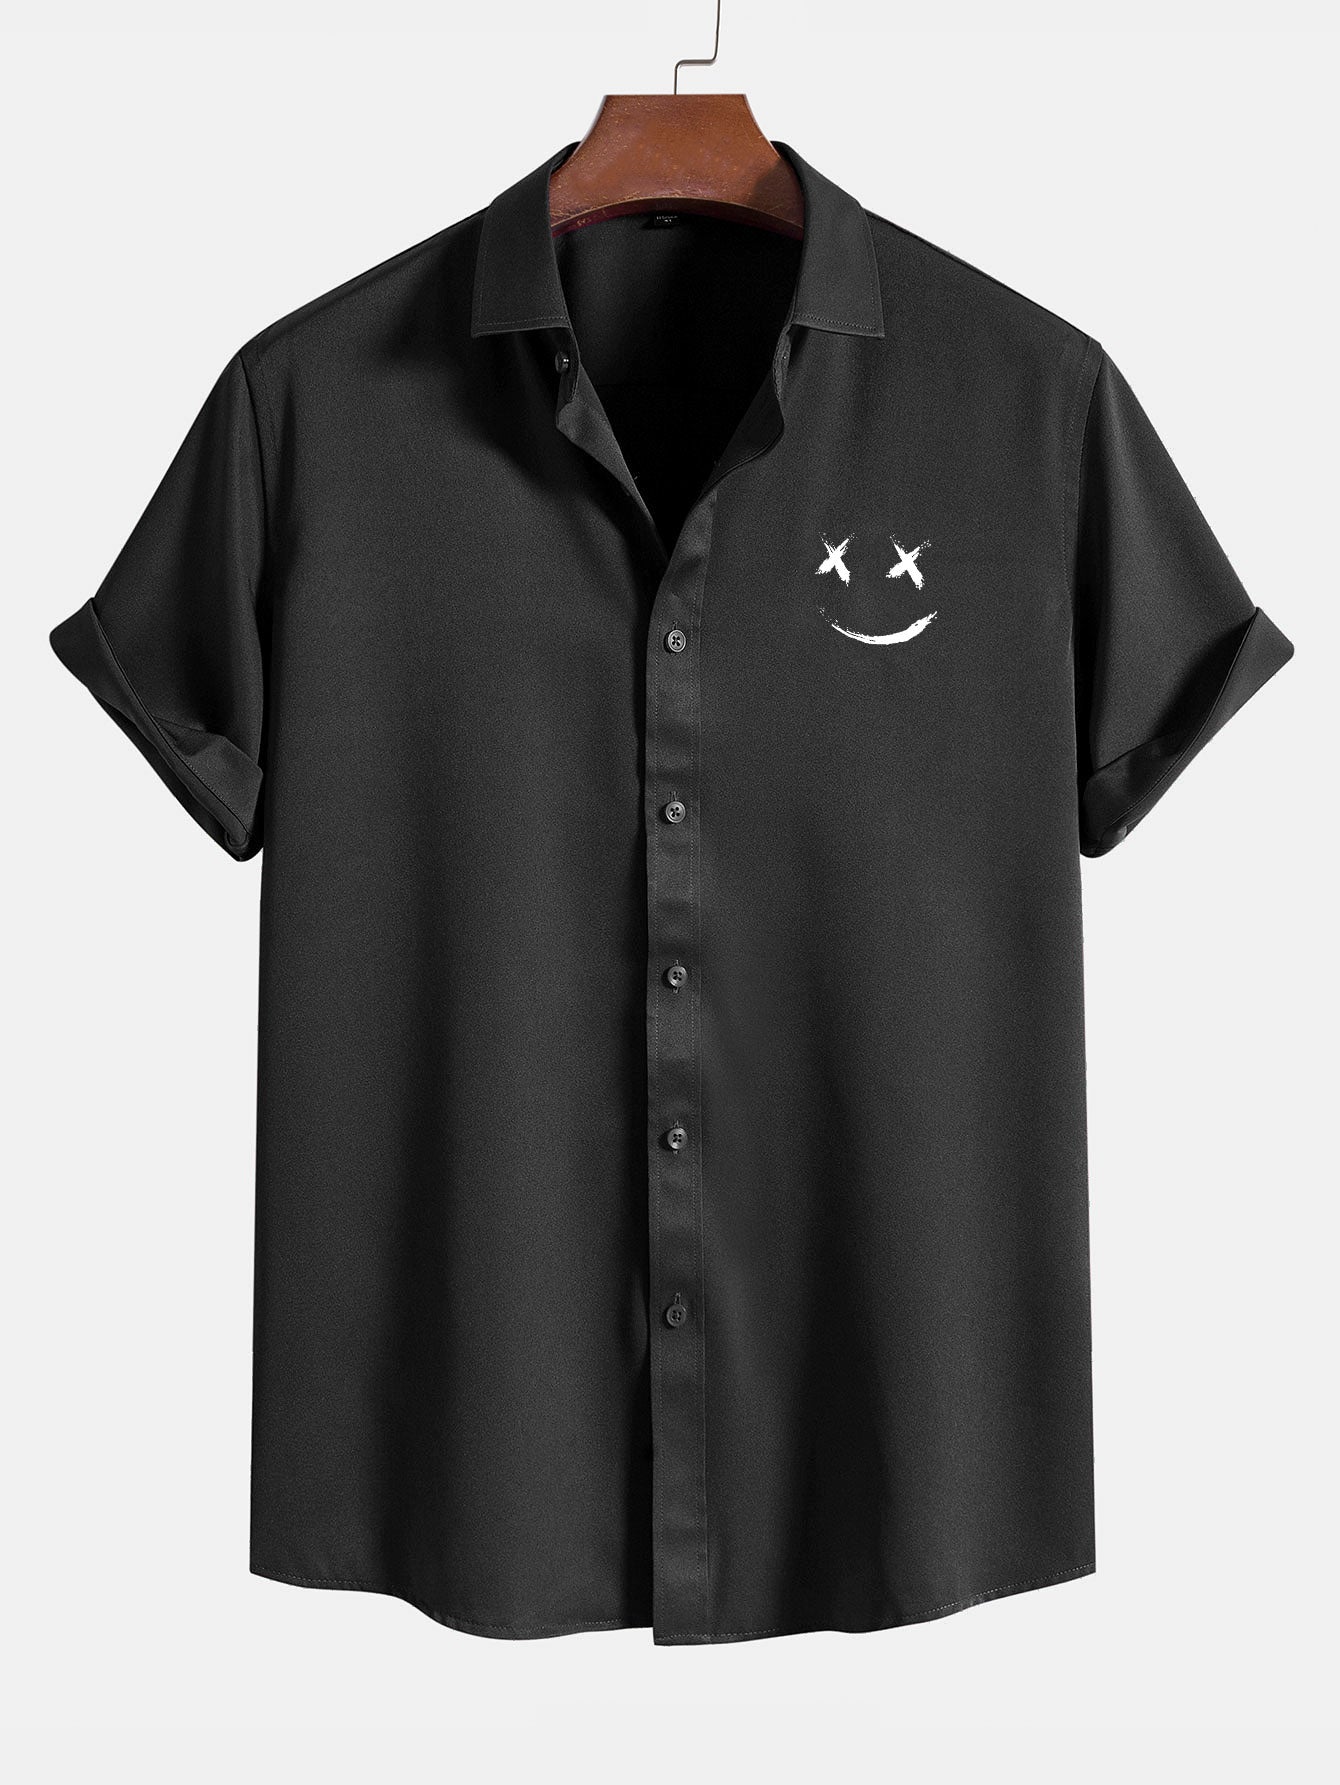 Sorriso Face Graphic Shirts